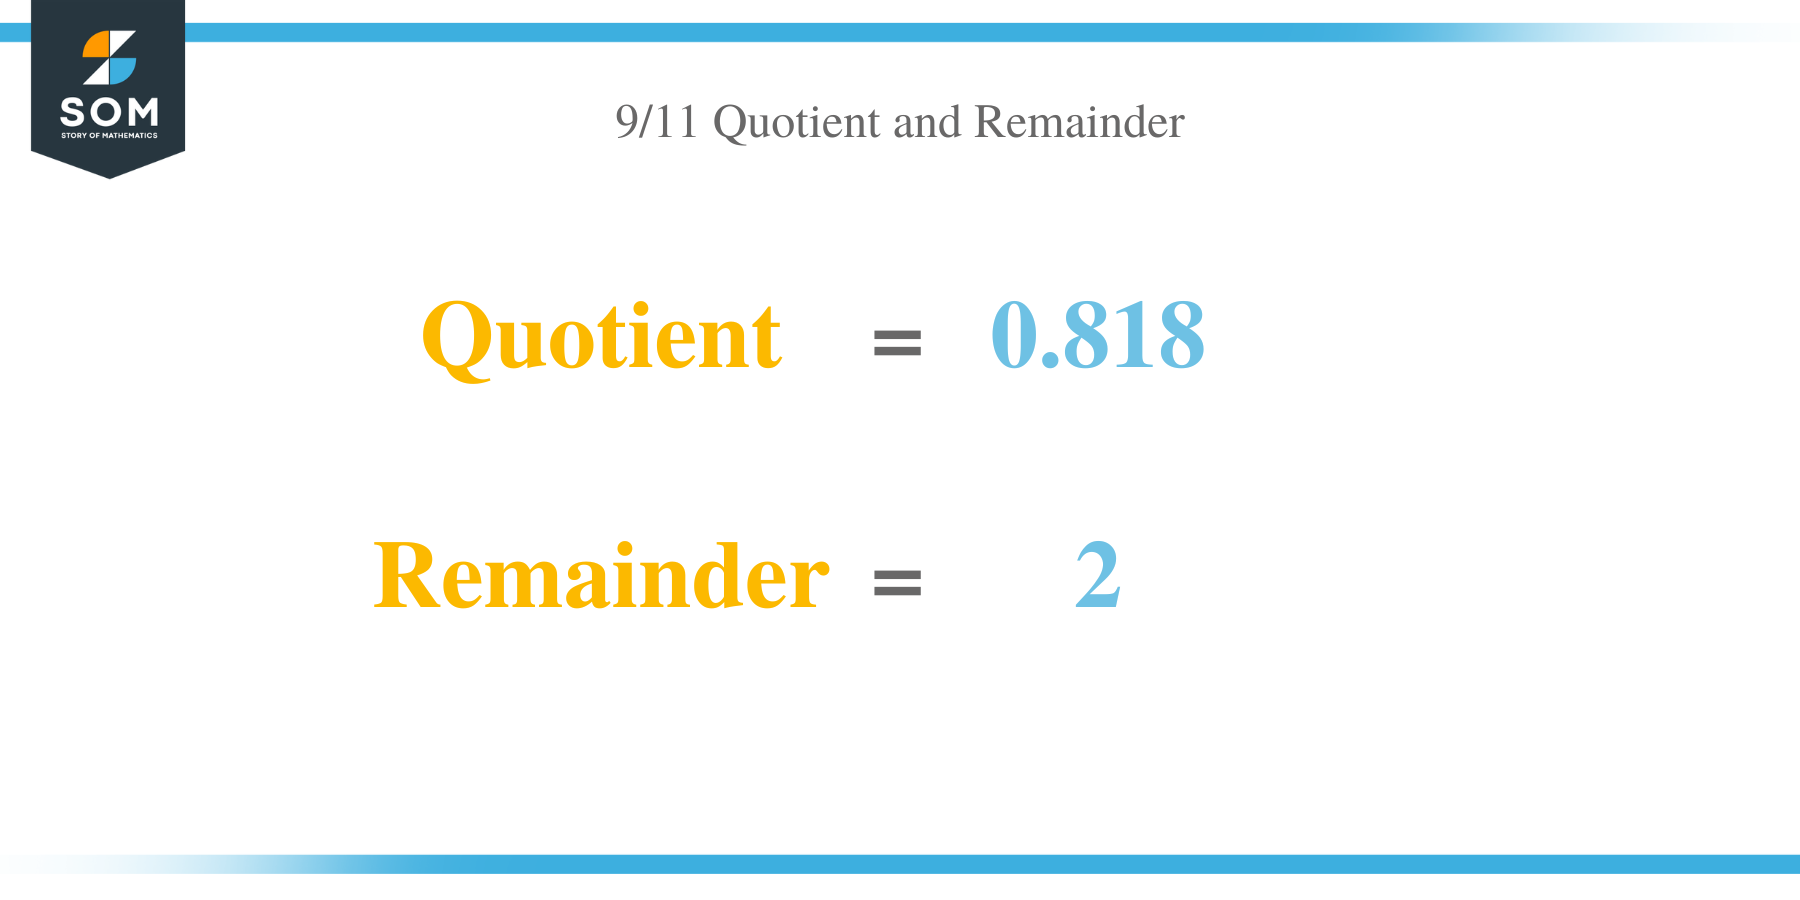 Quotient and Remainer of 9 per 11